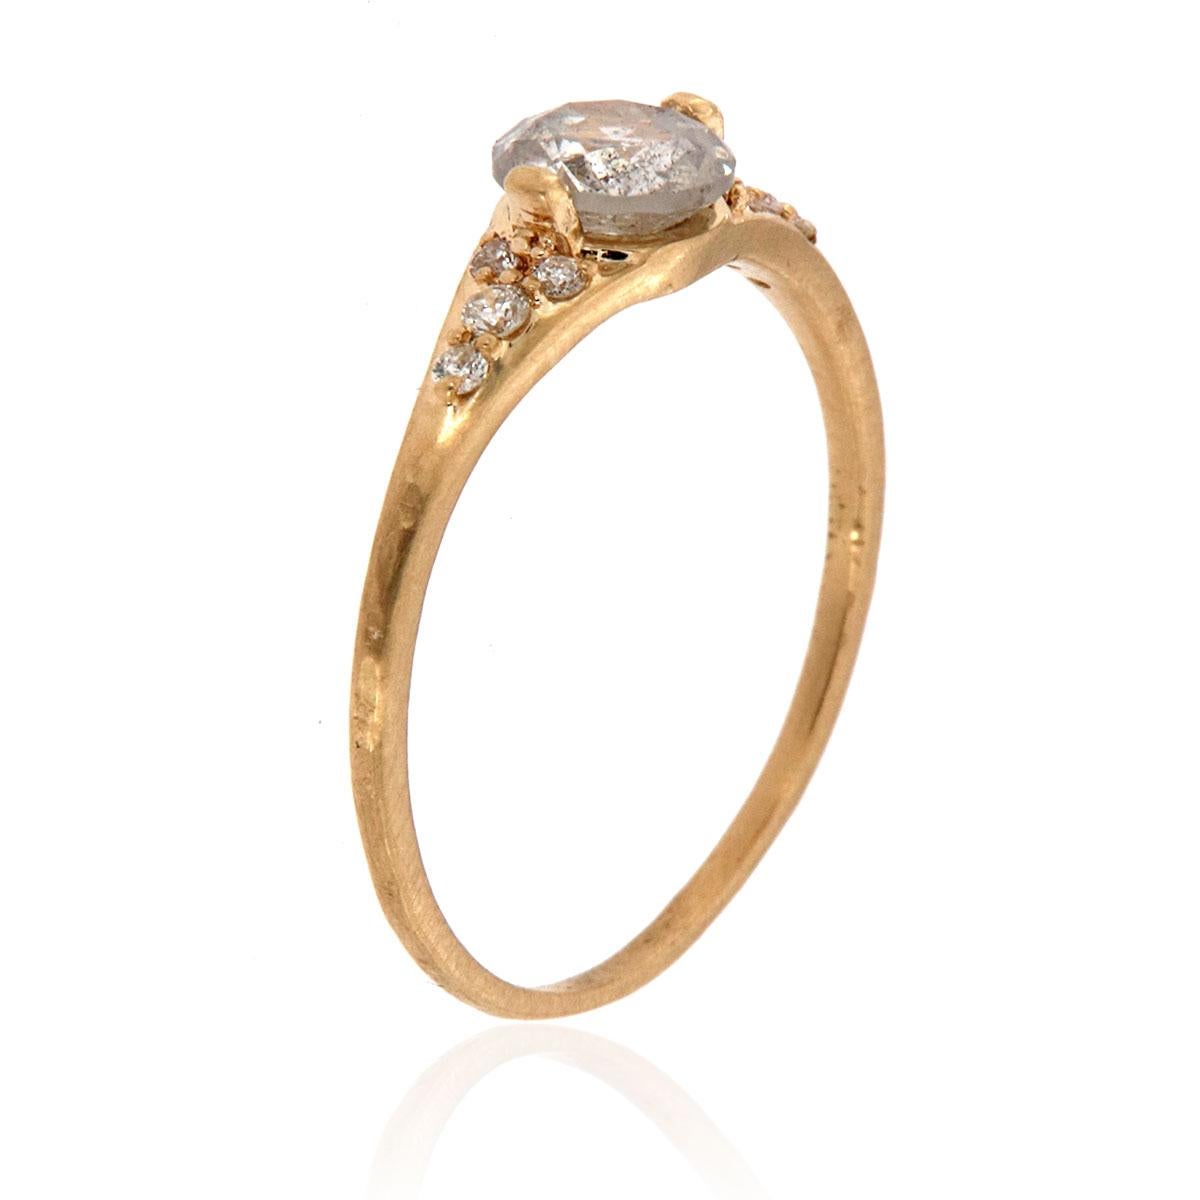 This delicately handcrafted, one-of-a-kind rustic, organically designed ring features a 0.65-carat Salt & Pepper Rose cut round-shaped natural diamond two prong set. Four round diamonds are scattered evenly on each side of the center gem. The 1.2 mm